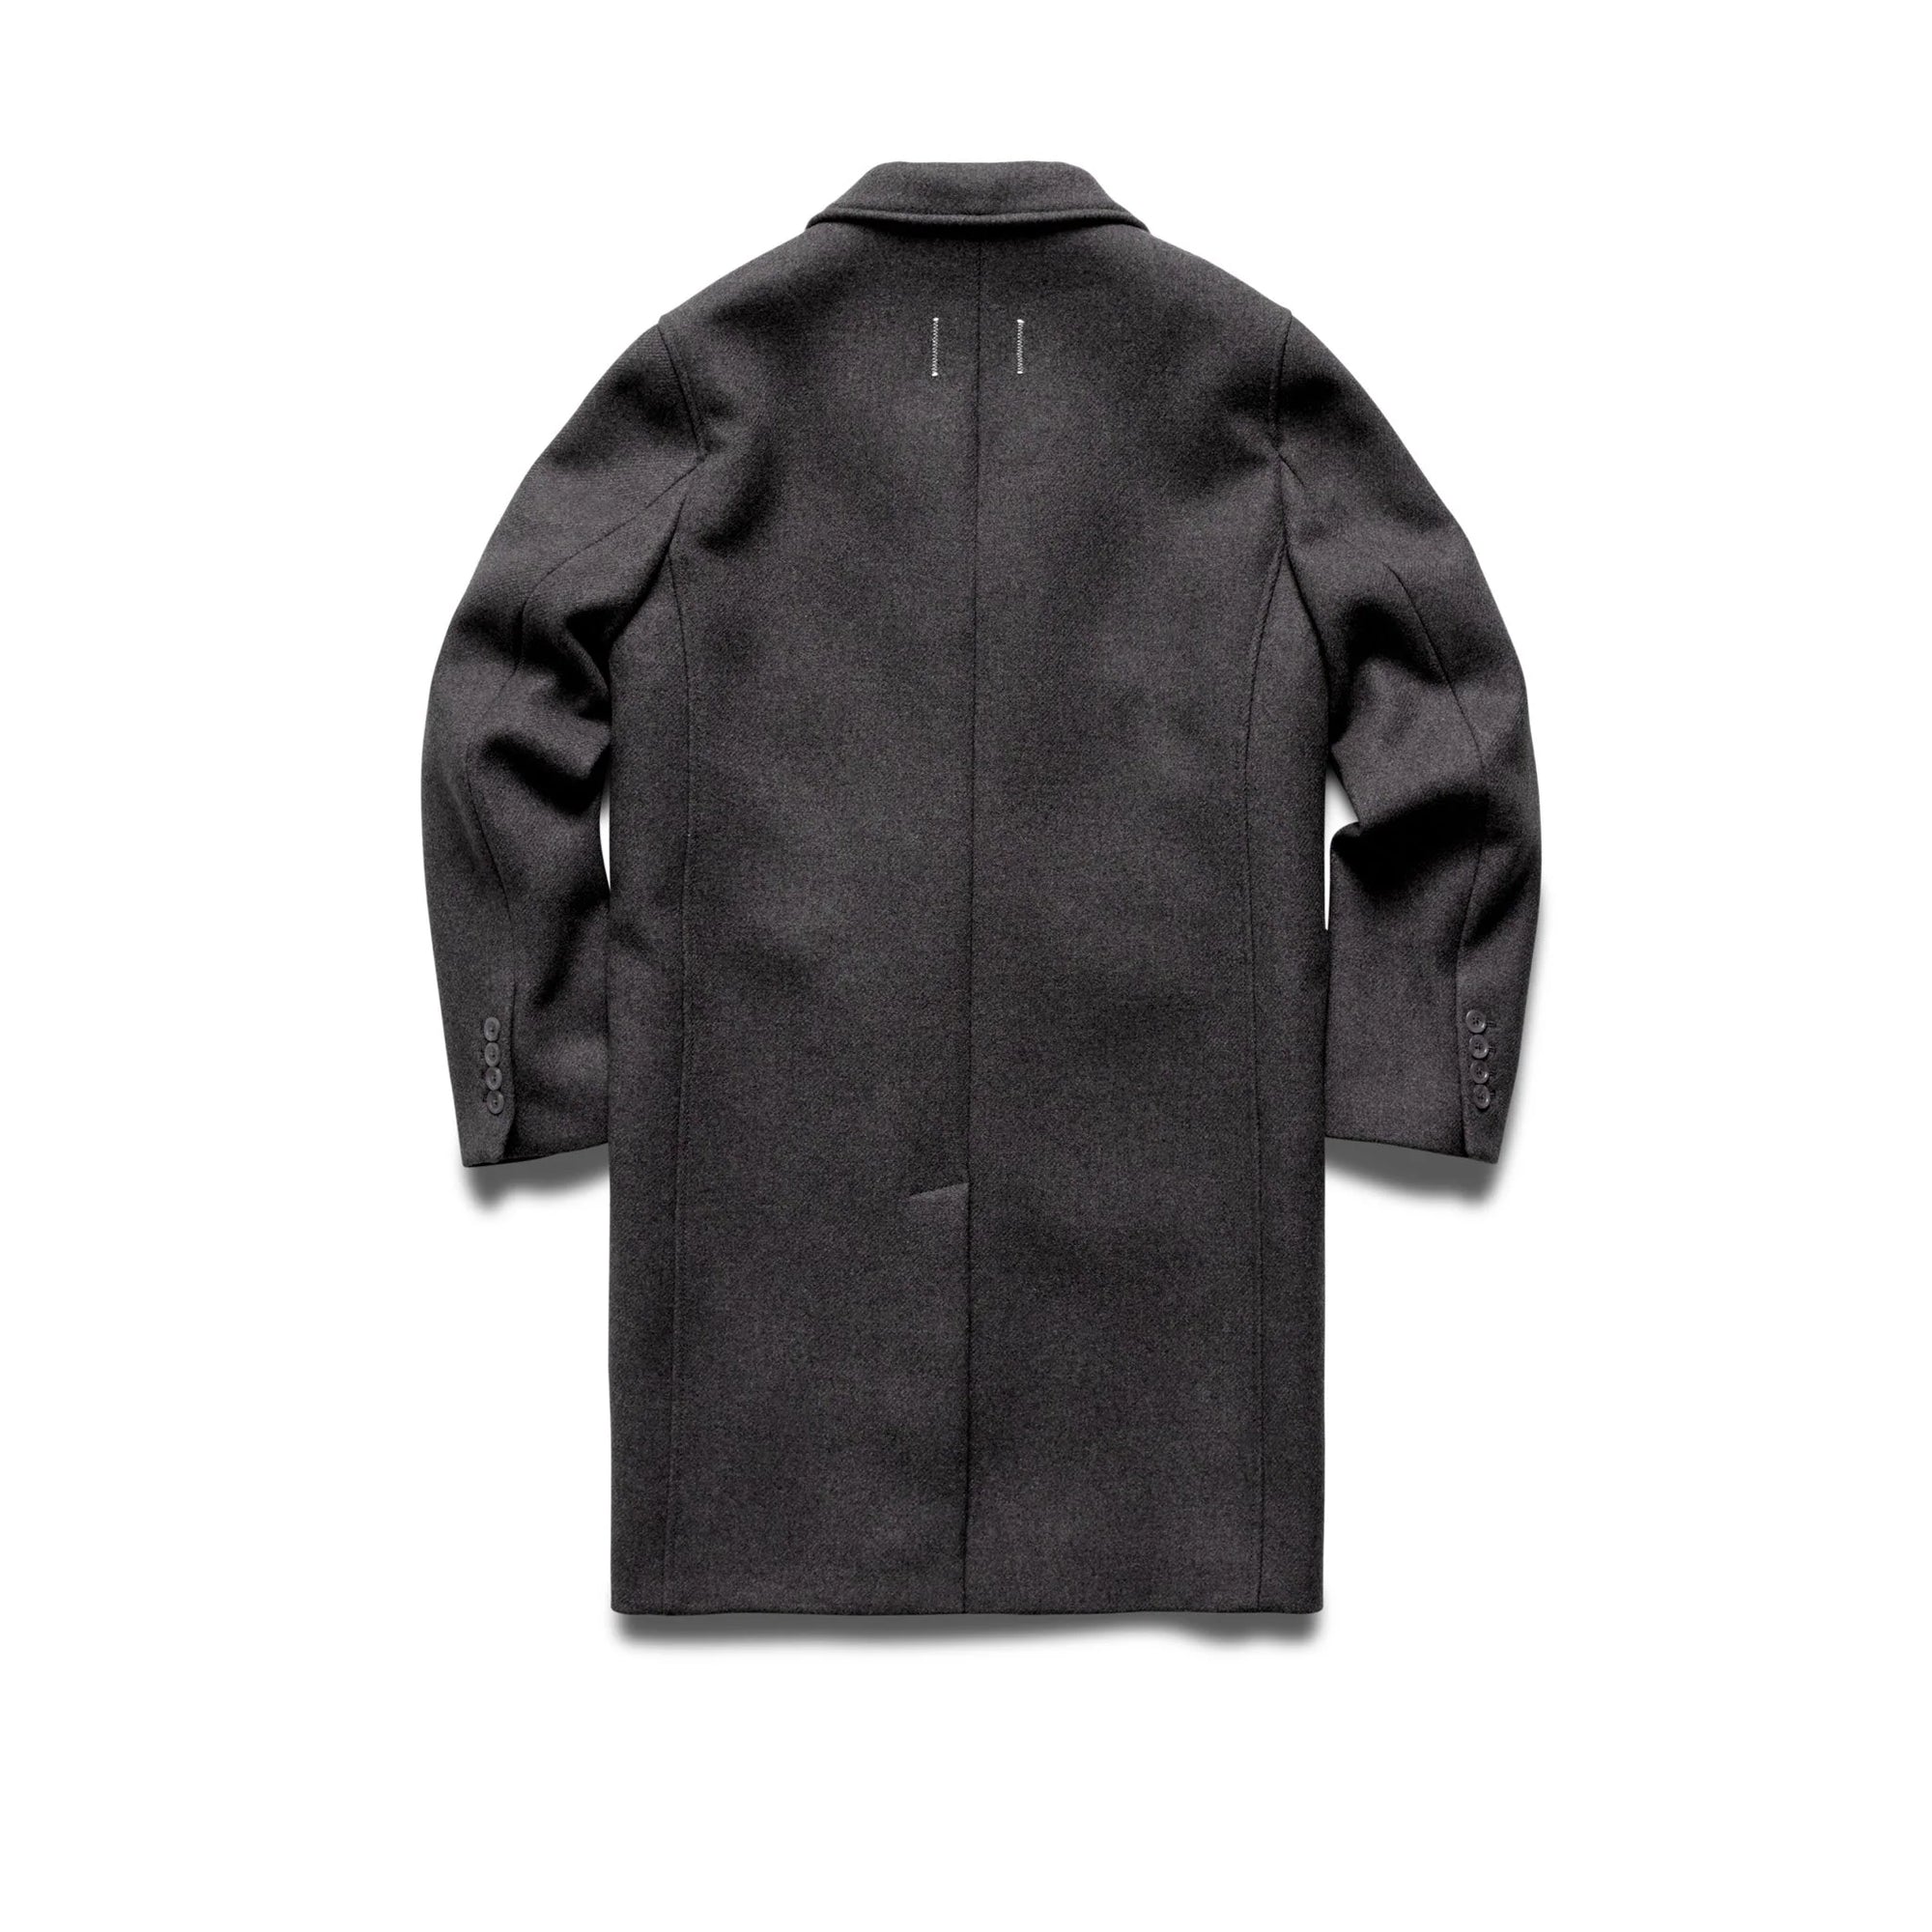 Reigning Champ Melton Wool Away Coat in Heather Grey